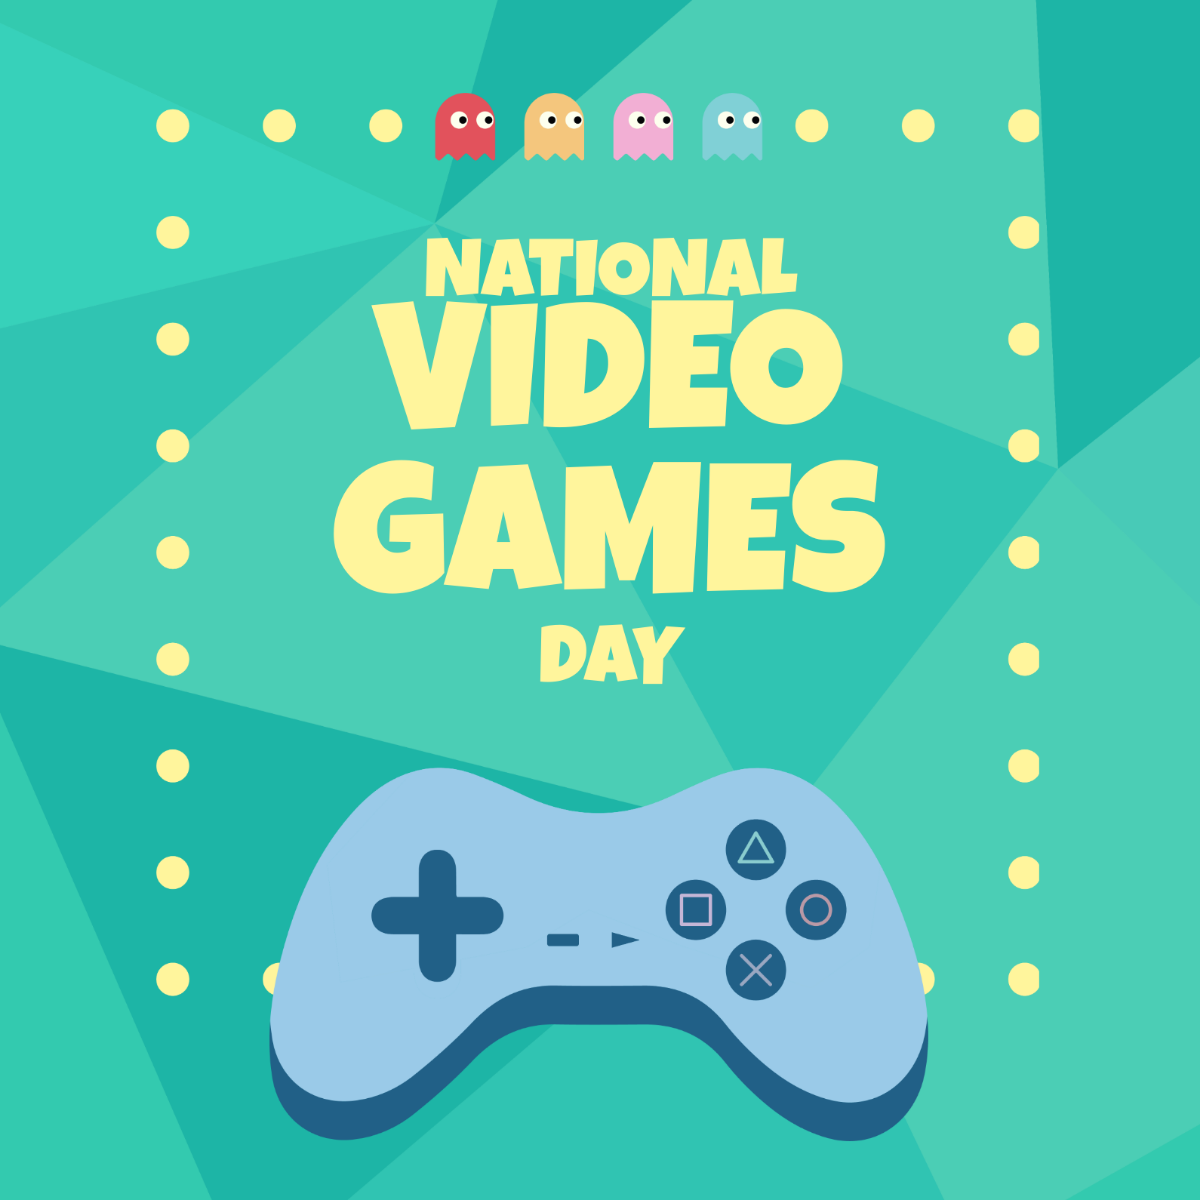 National Video Games Day LinkedIn Post